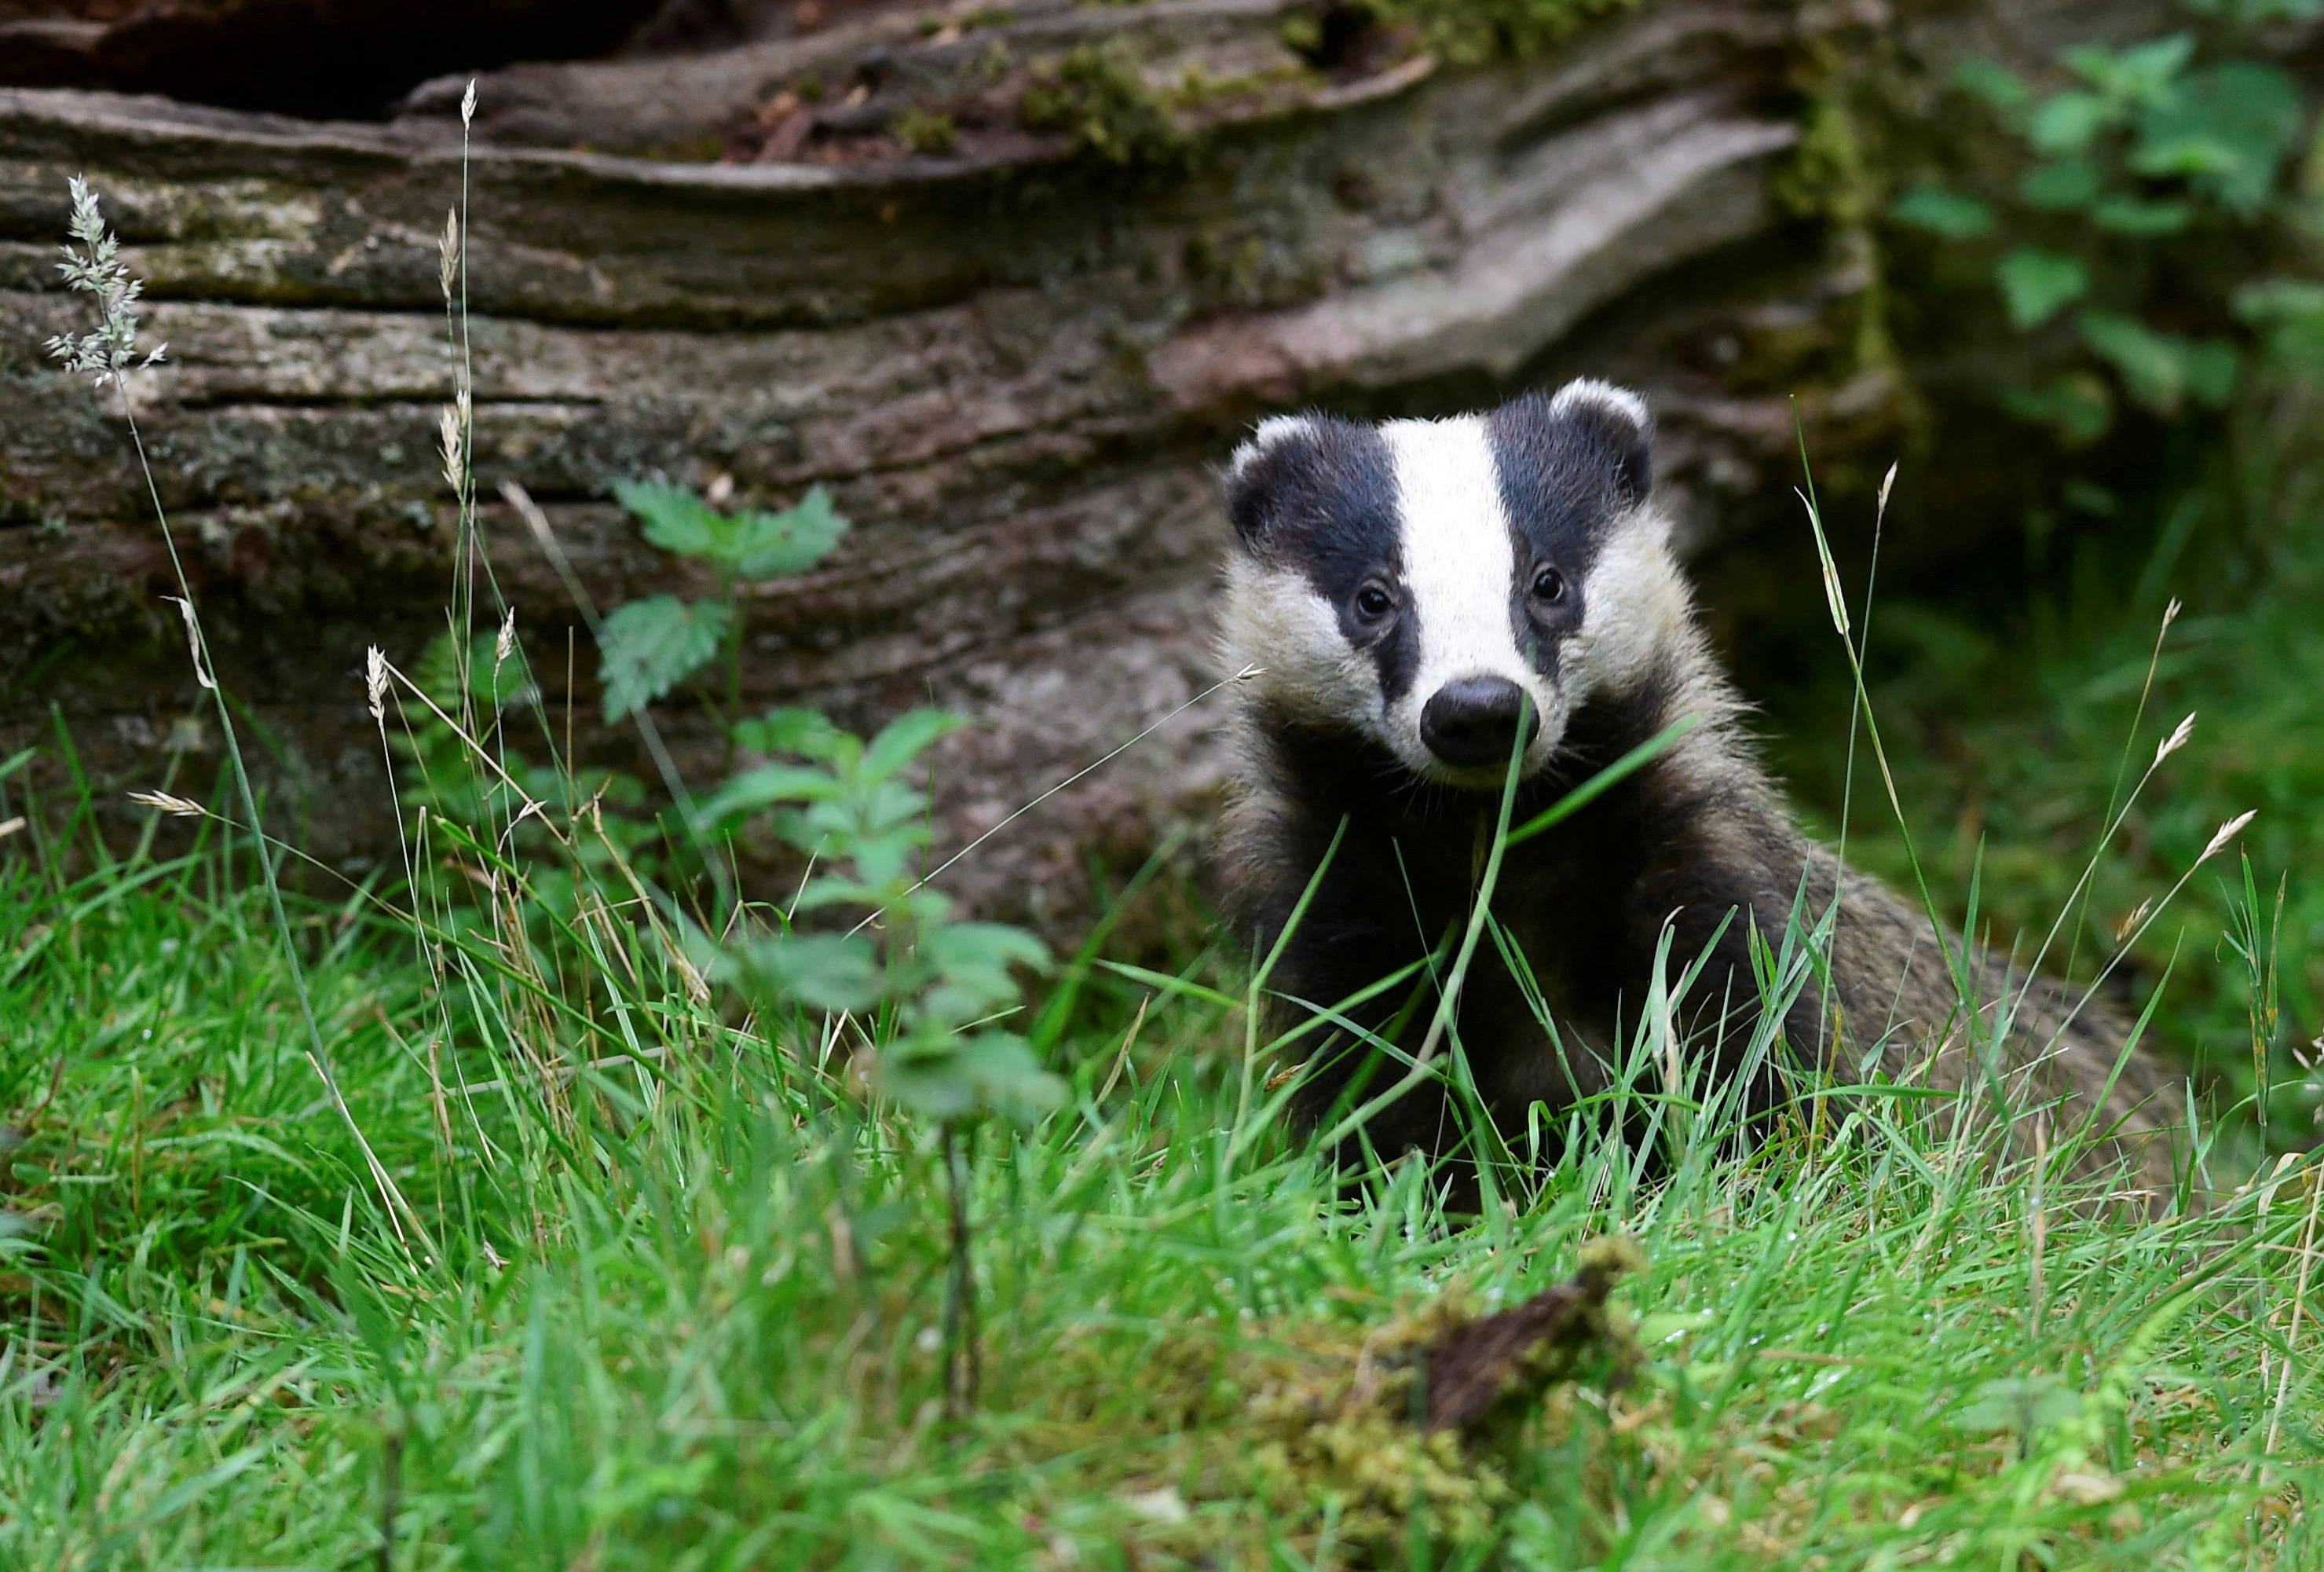 A young badger stands next to an old fallen tree in a wood in Llandeilo, South Wales